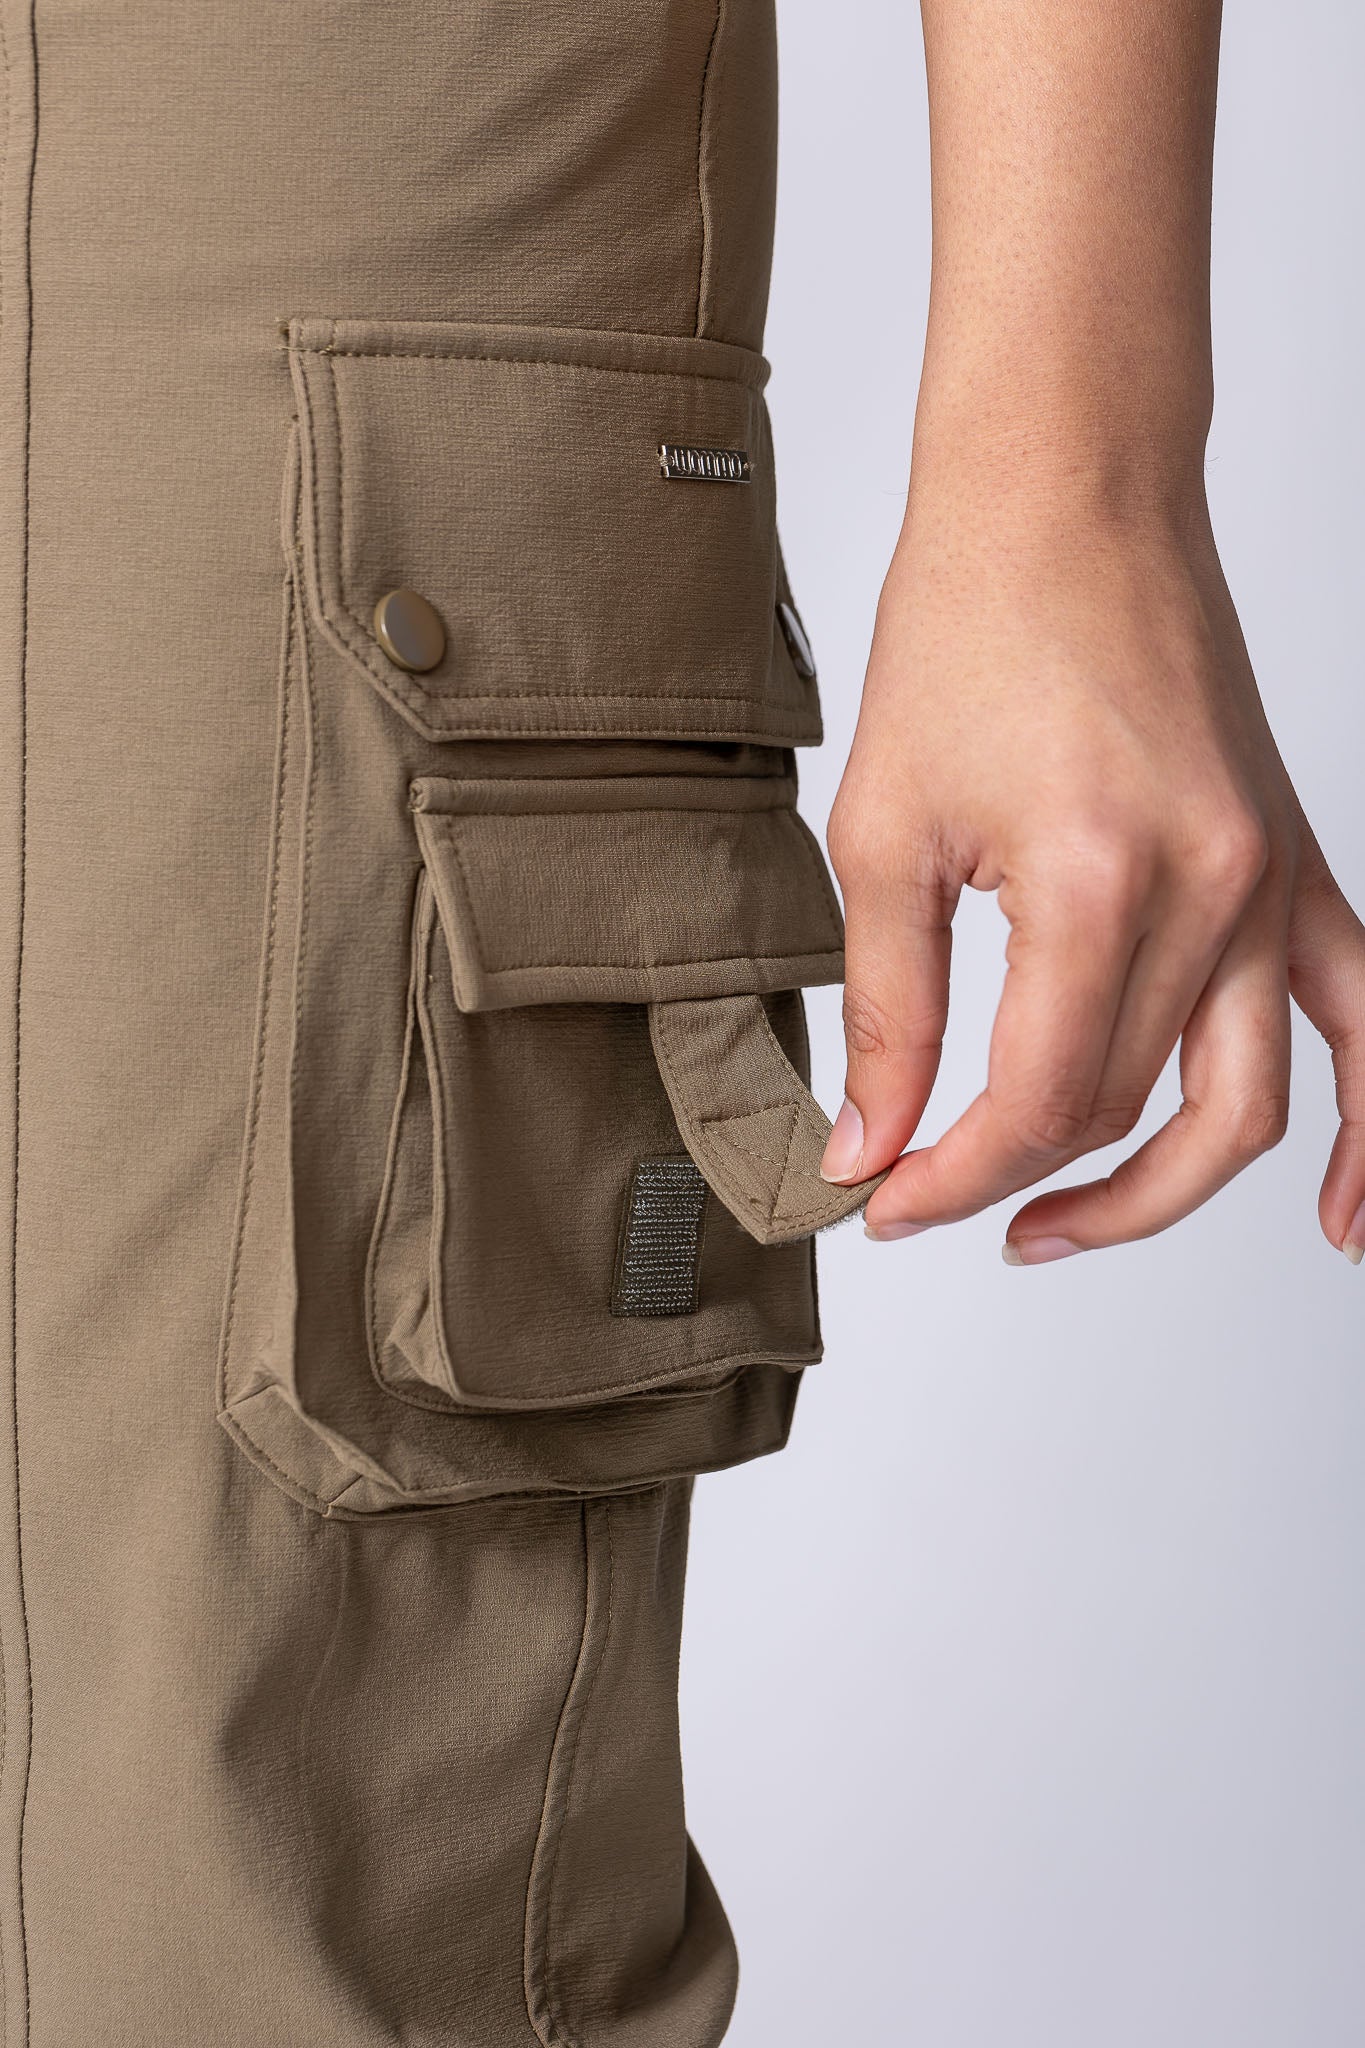 Safari cargo pants in khaki or olive colour. With stretchy fabric, extra leg pockets and back pockets. 